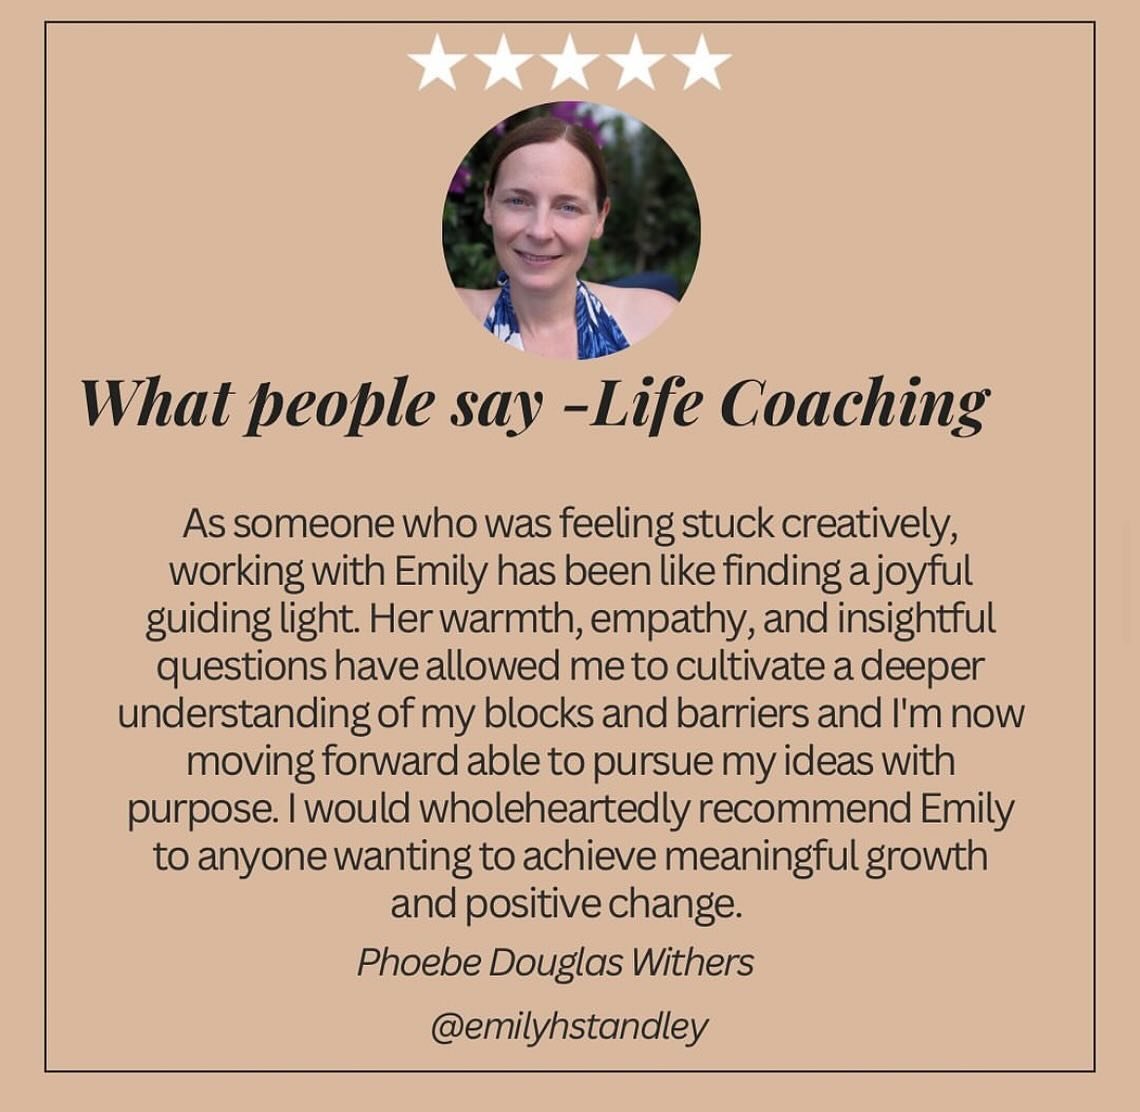 Feeling stuck? Longing for more in life? Ready for a change? 🌟

Book a free life coaching discovery call with me and let&rsquo;s work together to get clear on your vision and create the life you desire. ✨
-
-
-
-
-
-
-
-
-
#lifecoaching #wellbeing #